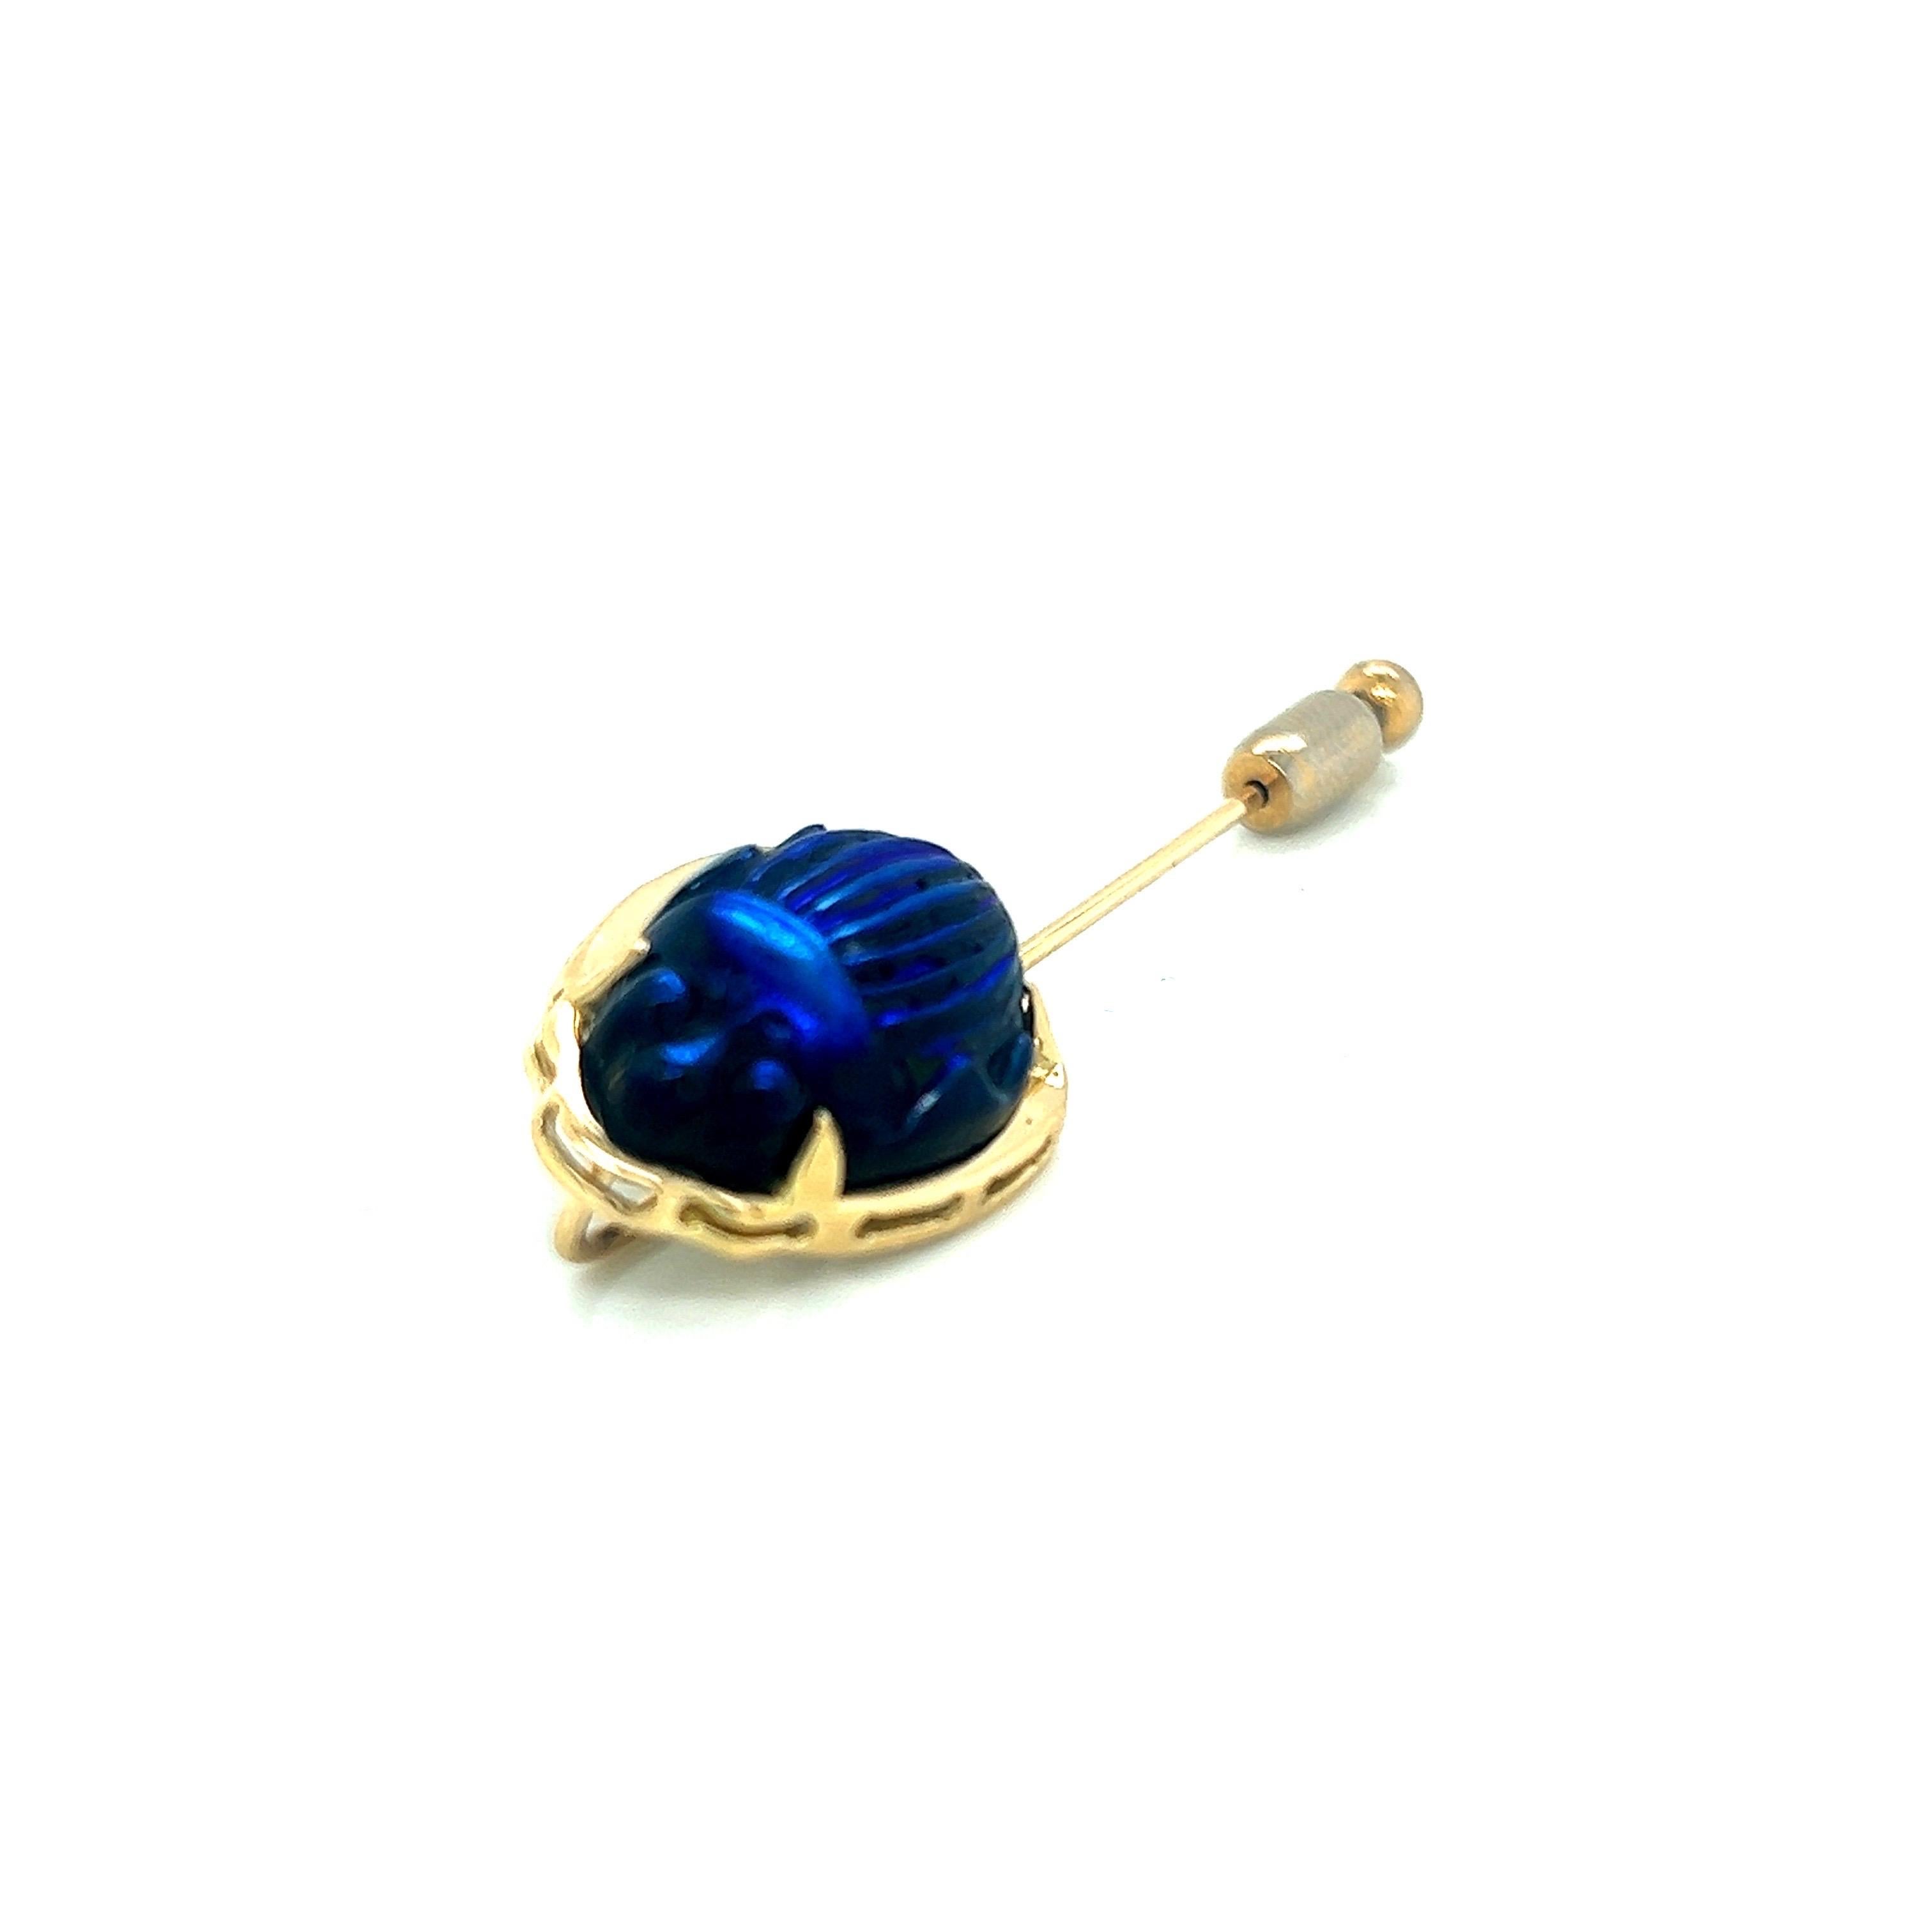 This stick/lapel pin is a breathtaking piece of jewelry that beautifully combines luxurious 18k yellow gold with shimmering Favrile cobalt blue glass scarab. Crafted by skilled artisans, this pin exudes sophistication and timeless elegance.

The